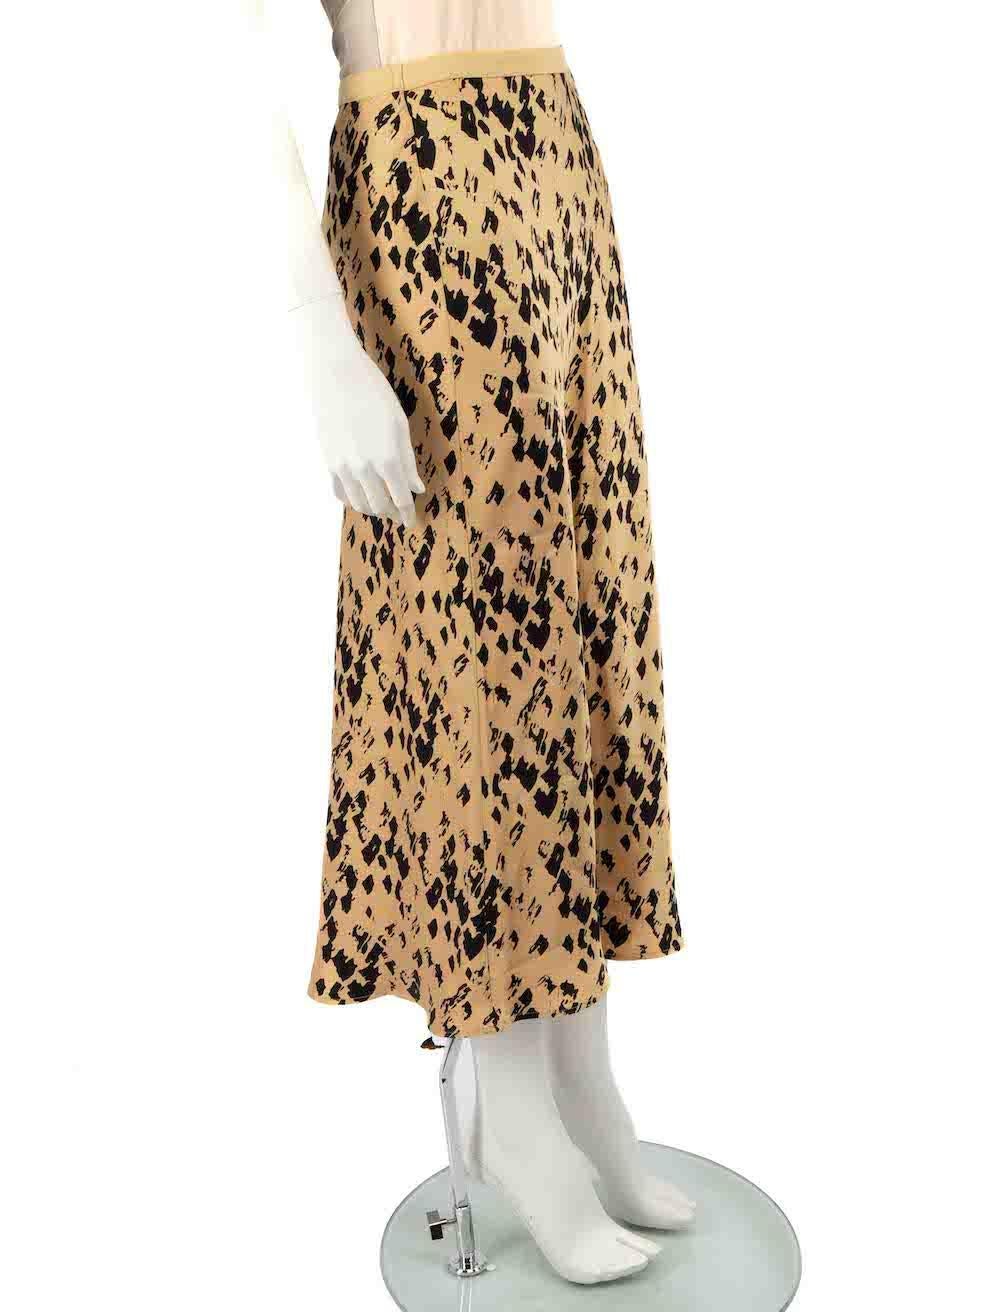 CONDITION is Very good. Hardly any visible wear to skirt is evident on this used Anine Bingdesigner resale item.
 
 
 
 Details
 
 
 Gold
 
 Silk
 
 Slip skirt
 
 Leopard print
 
 Knee length
 
 Elasticated waistband
 
 
 
 
 
 Made in China
 
 
 
